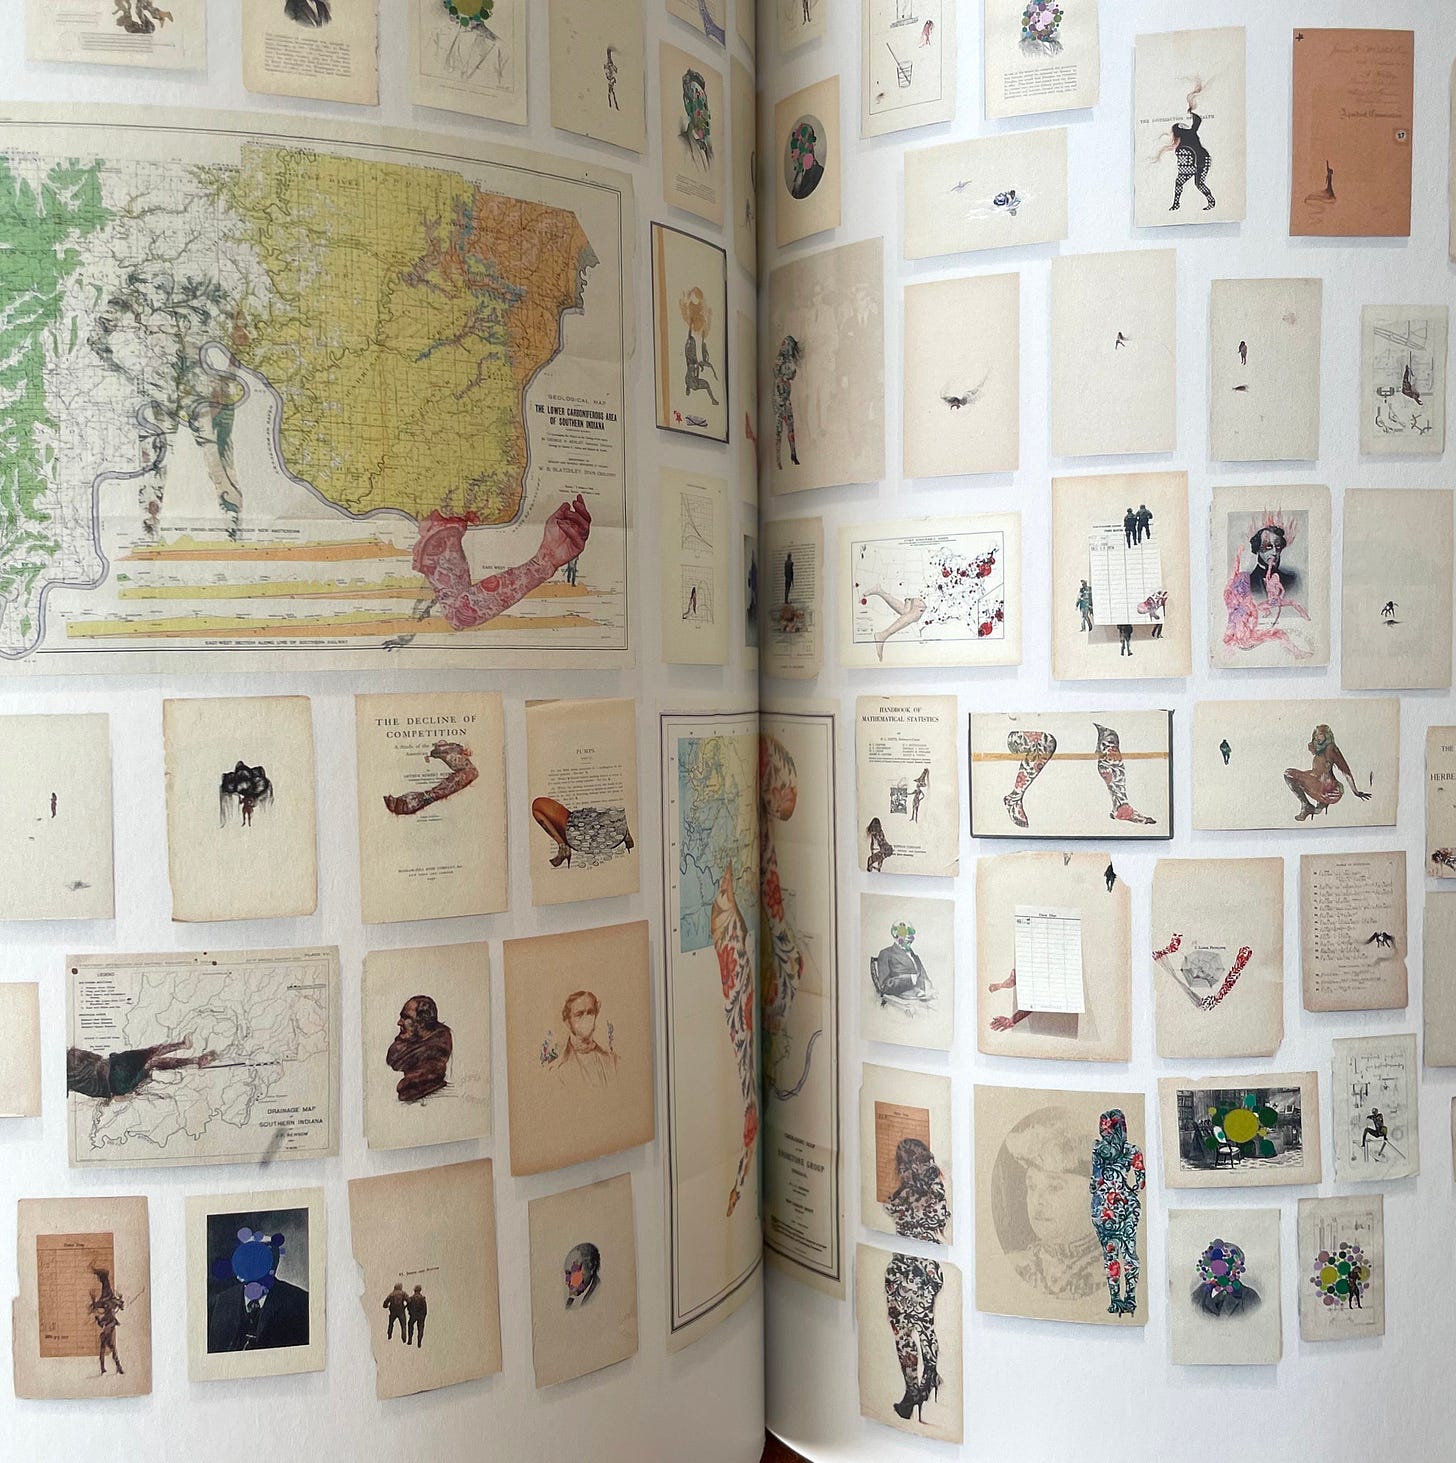 Photograph of two pages in Firelei Báez's book Bloodlines showing what look like archival material with paintings on top.